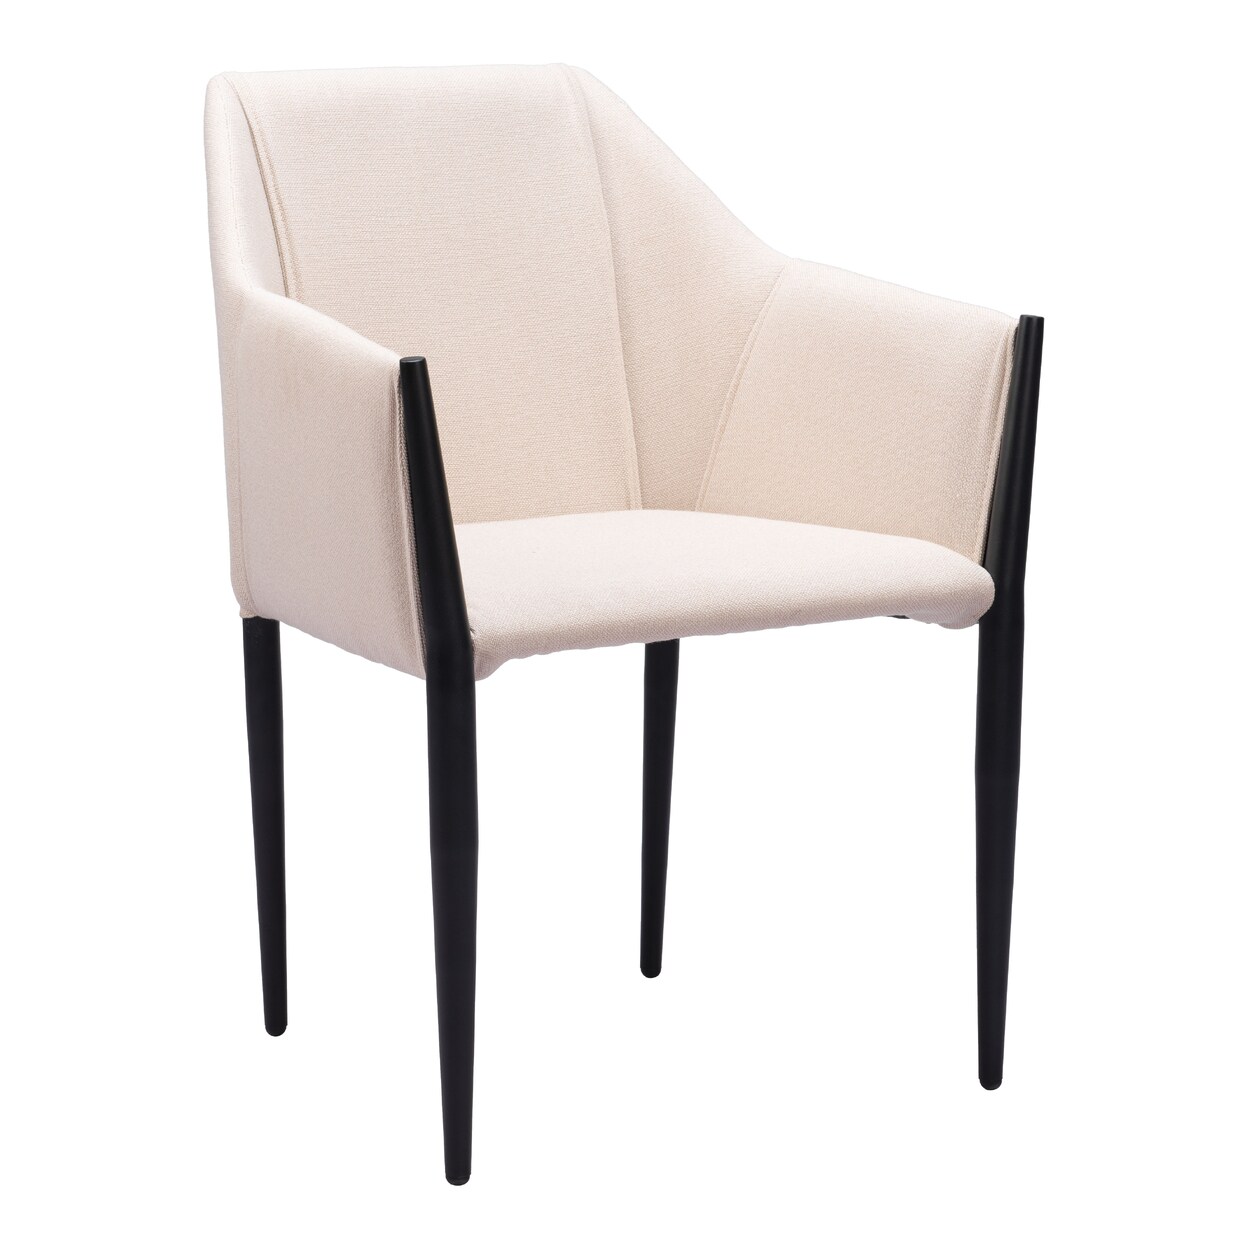 Zuo Modern Contemporary Inc. Andover Dining Chair (Set of 2) Beige